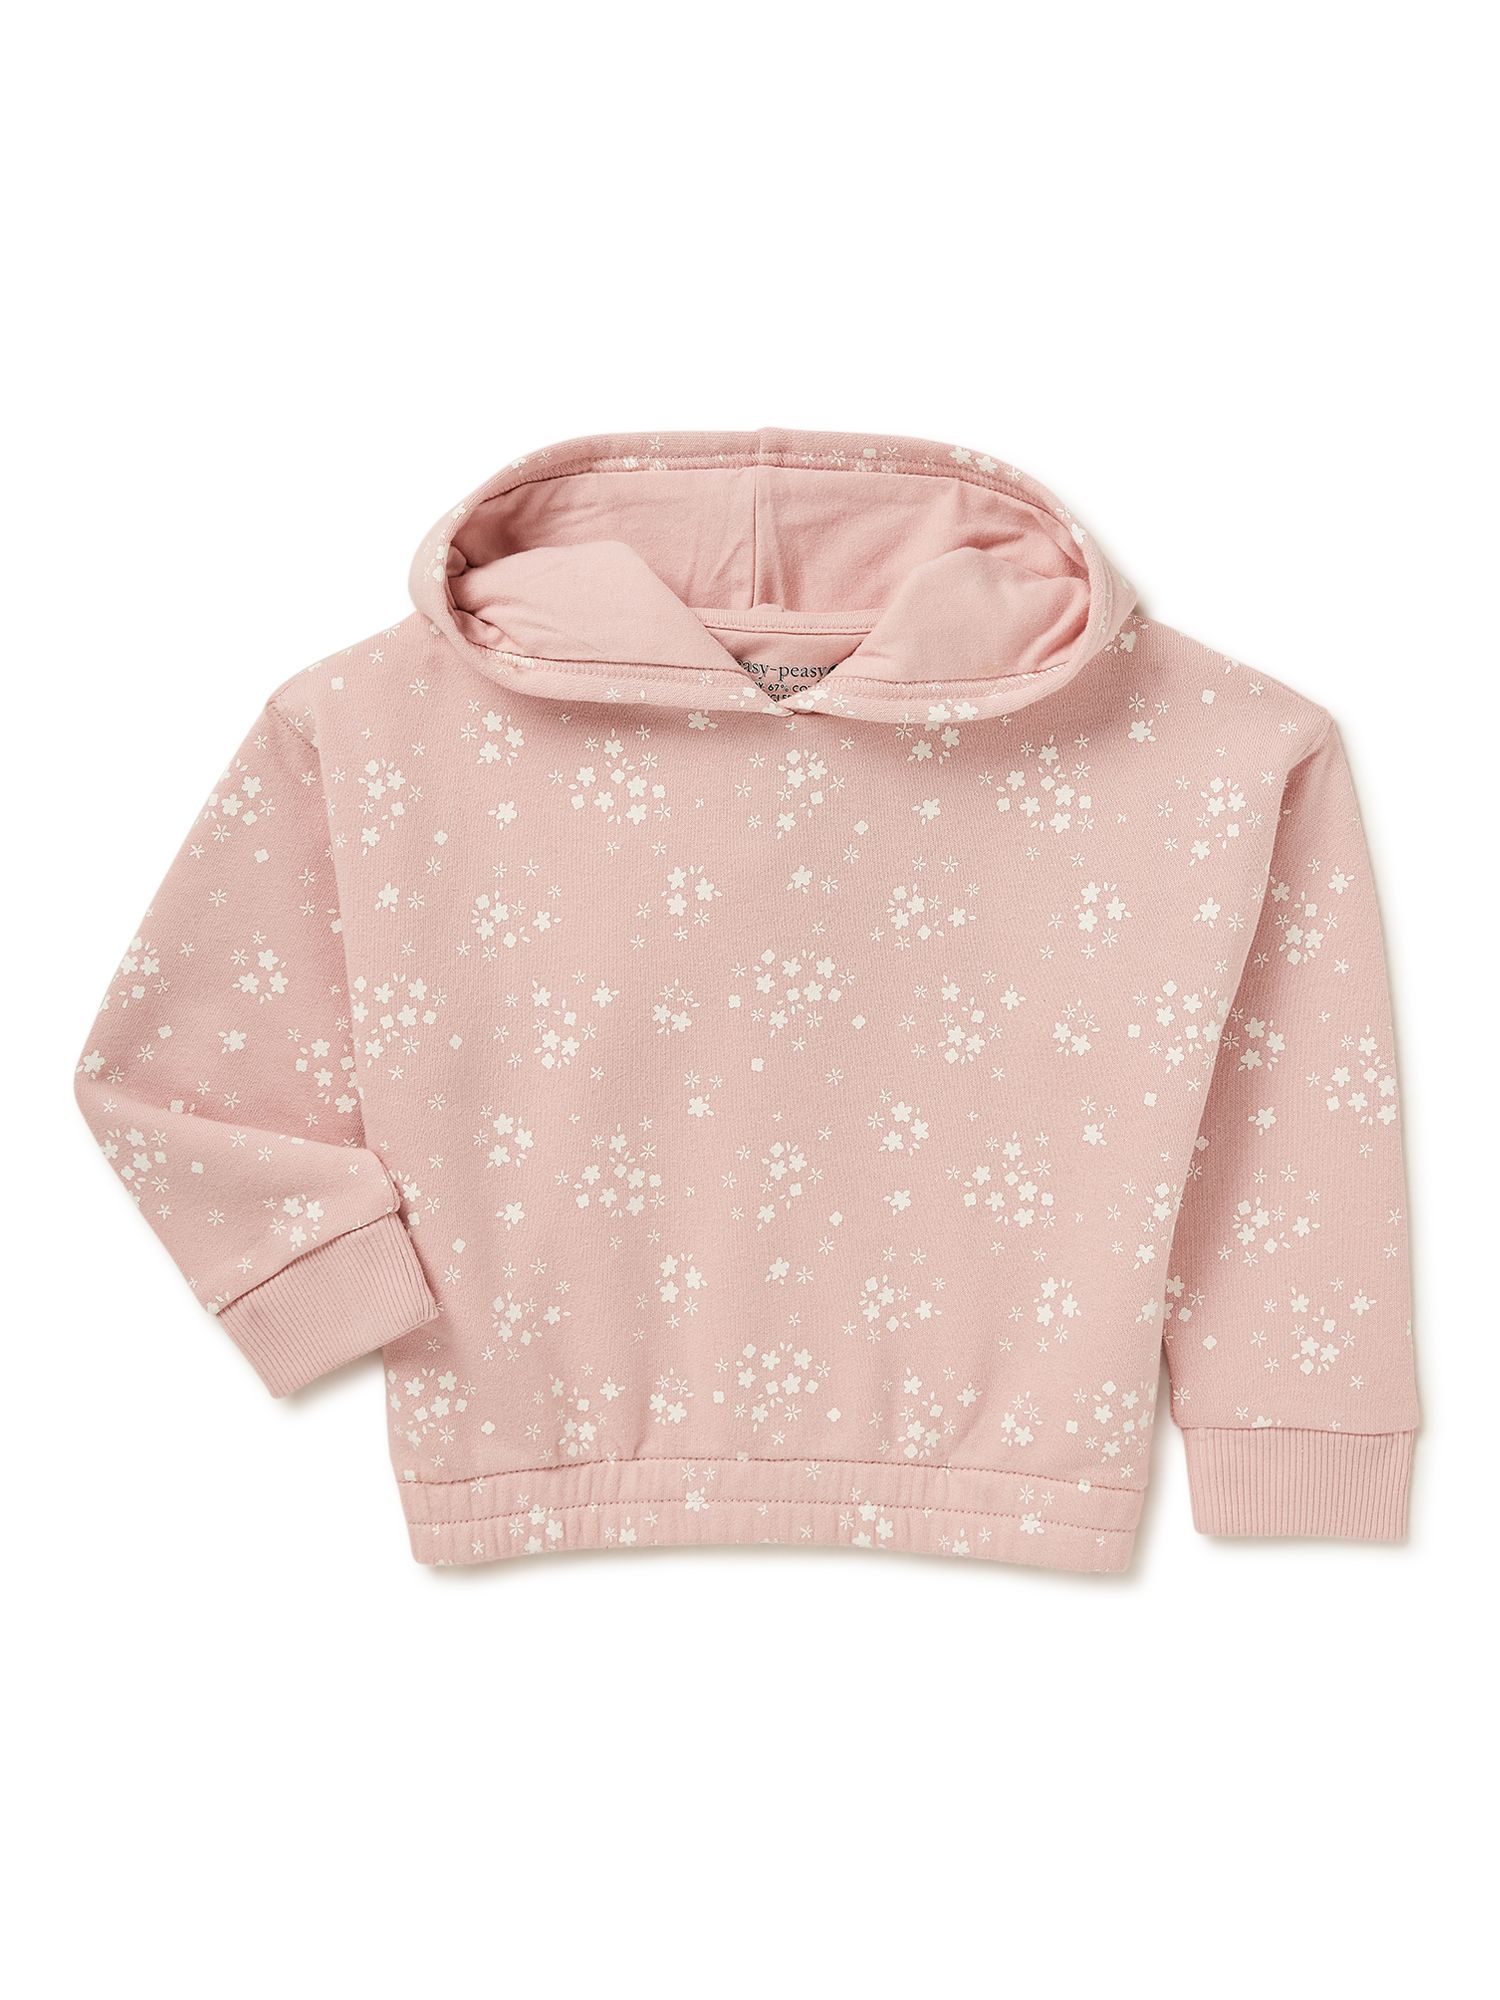 easy-peasy Baby and Toddler Girls' Pull-Over Hoodie, Sizes 12 Months-5T | Walmart (US)